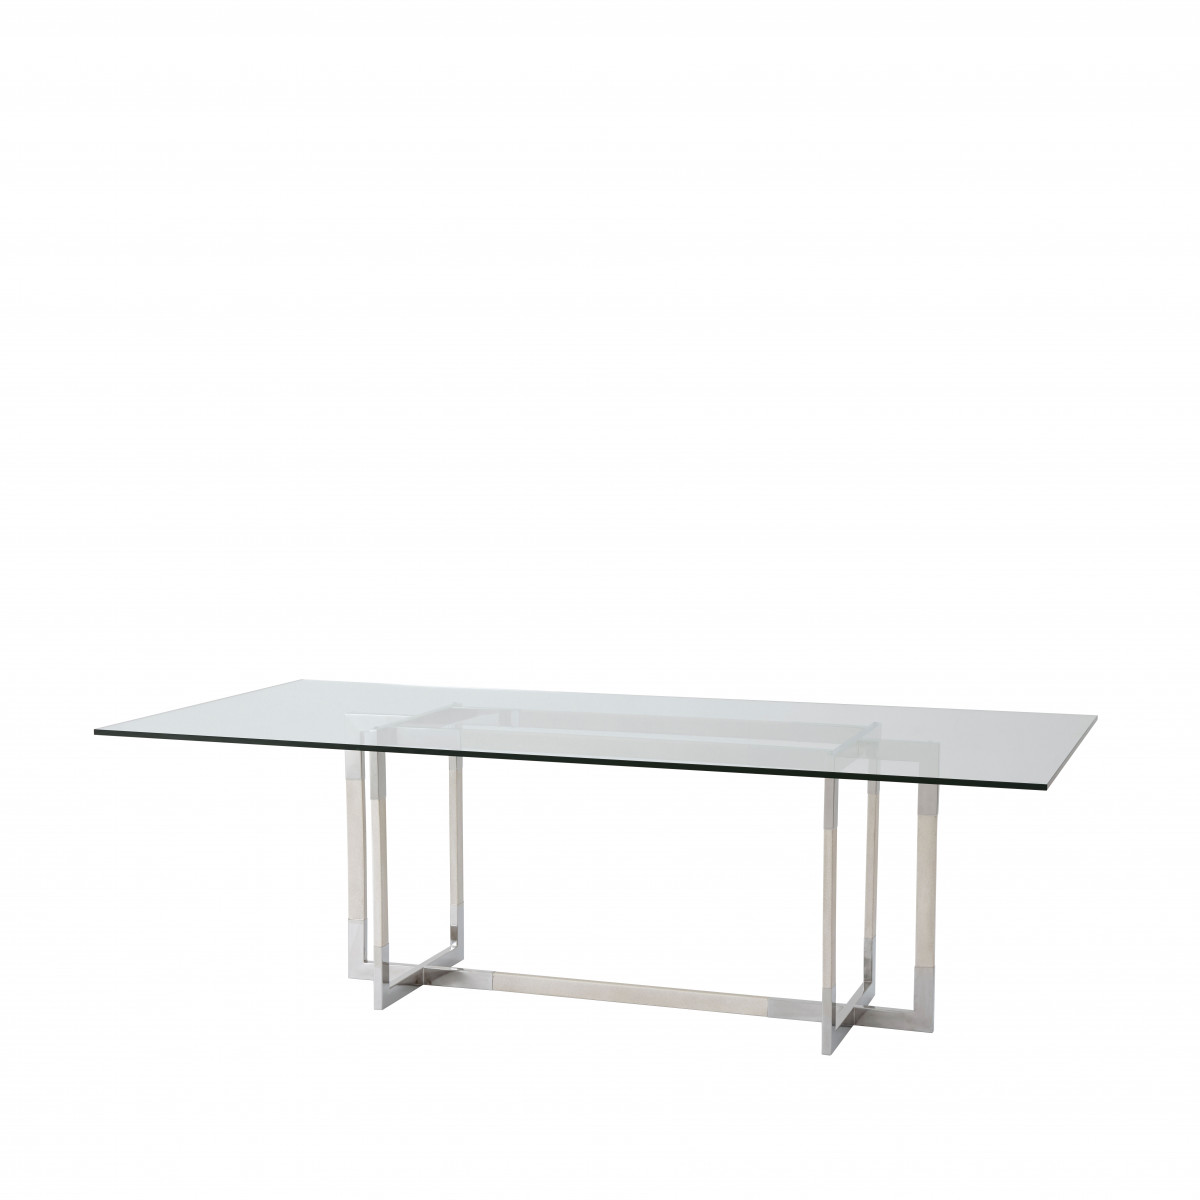 Shop Orville Dining Table from DiMare Design on Openhaus